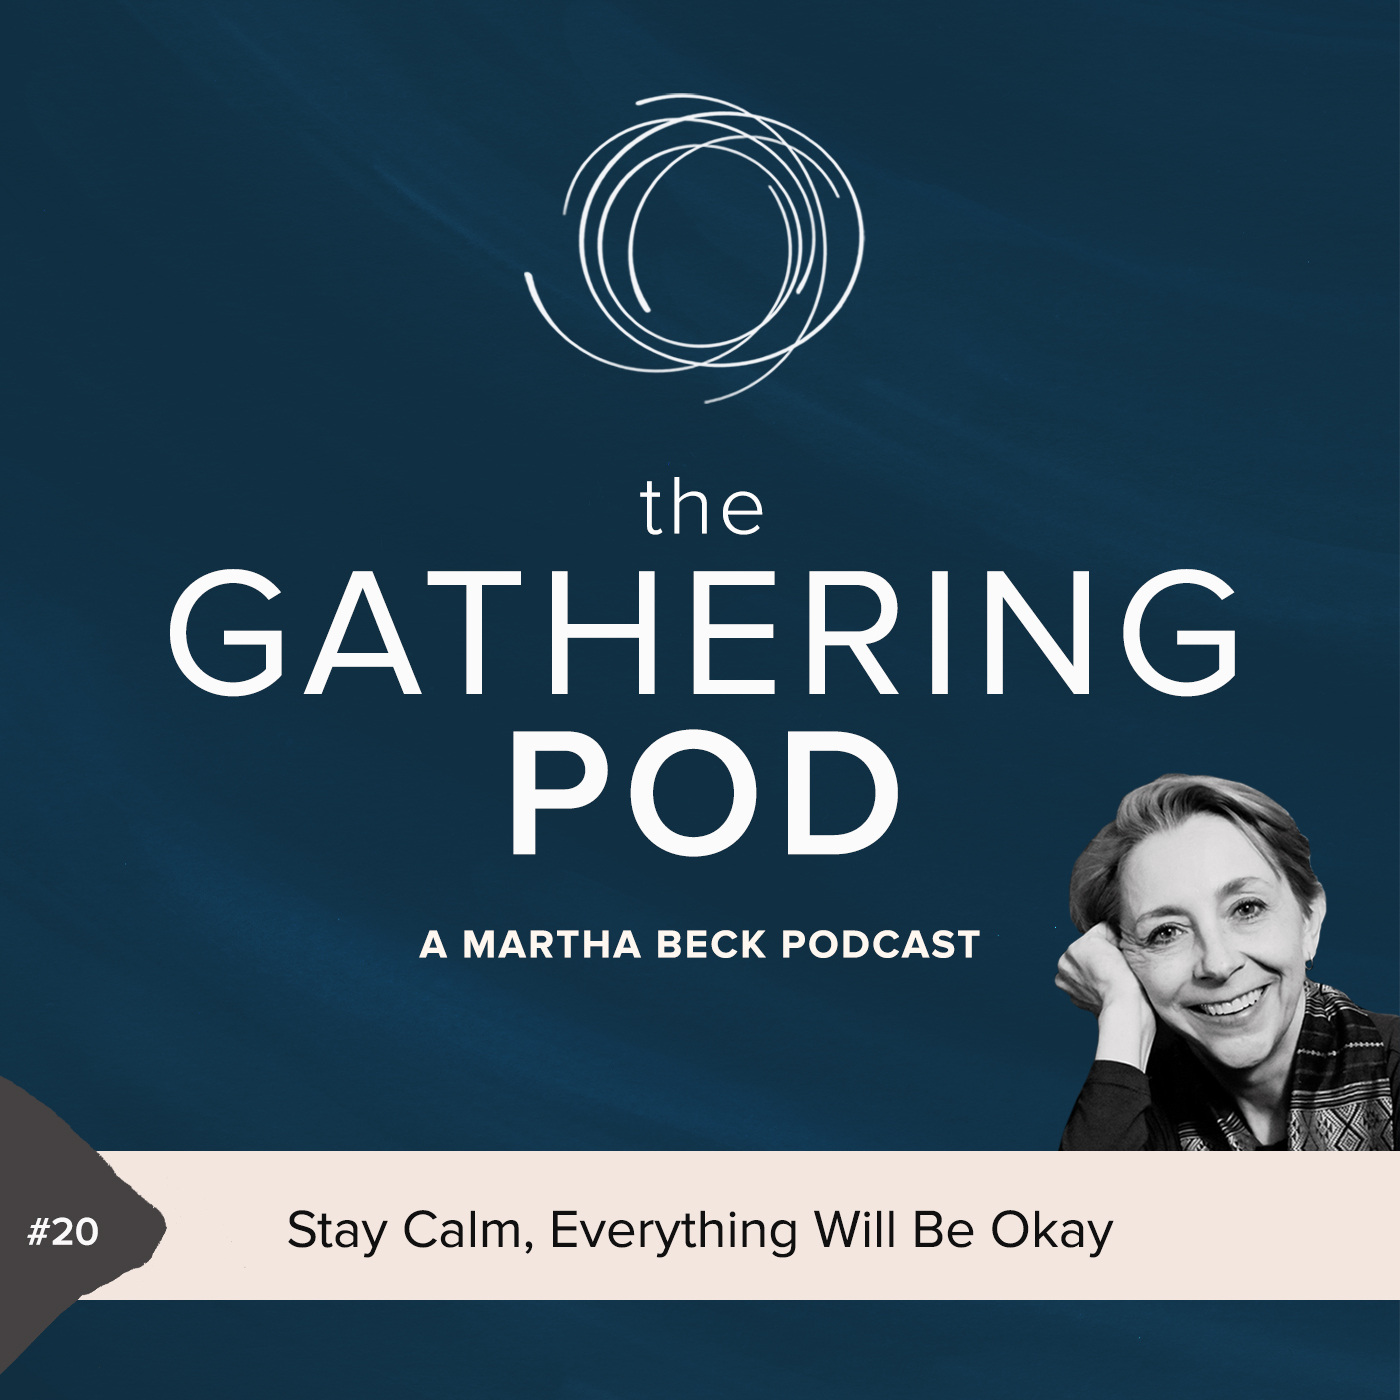 Image for The Gathering Pod A Martha Beck Podcast Episode #20 Stay Calm, Everything Will Be Okay